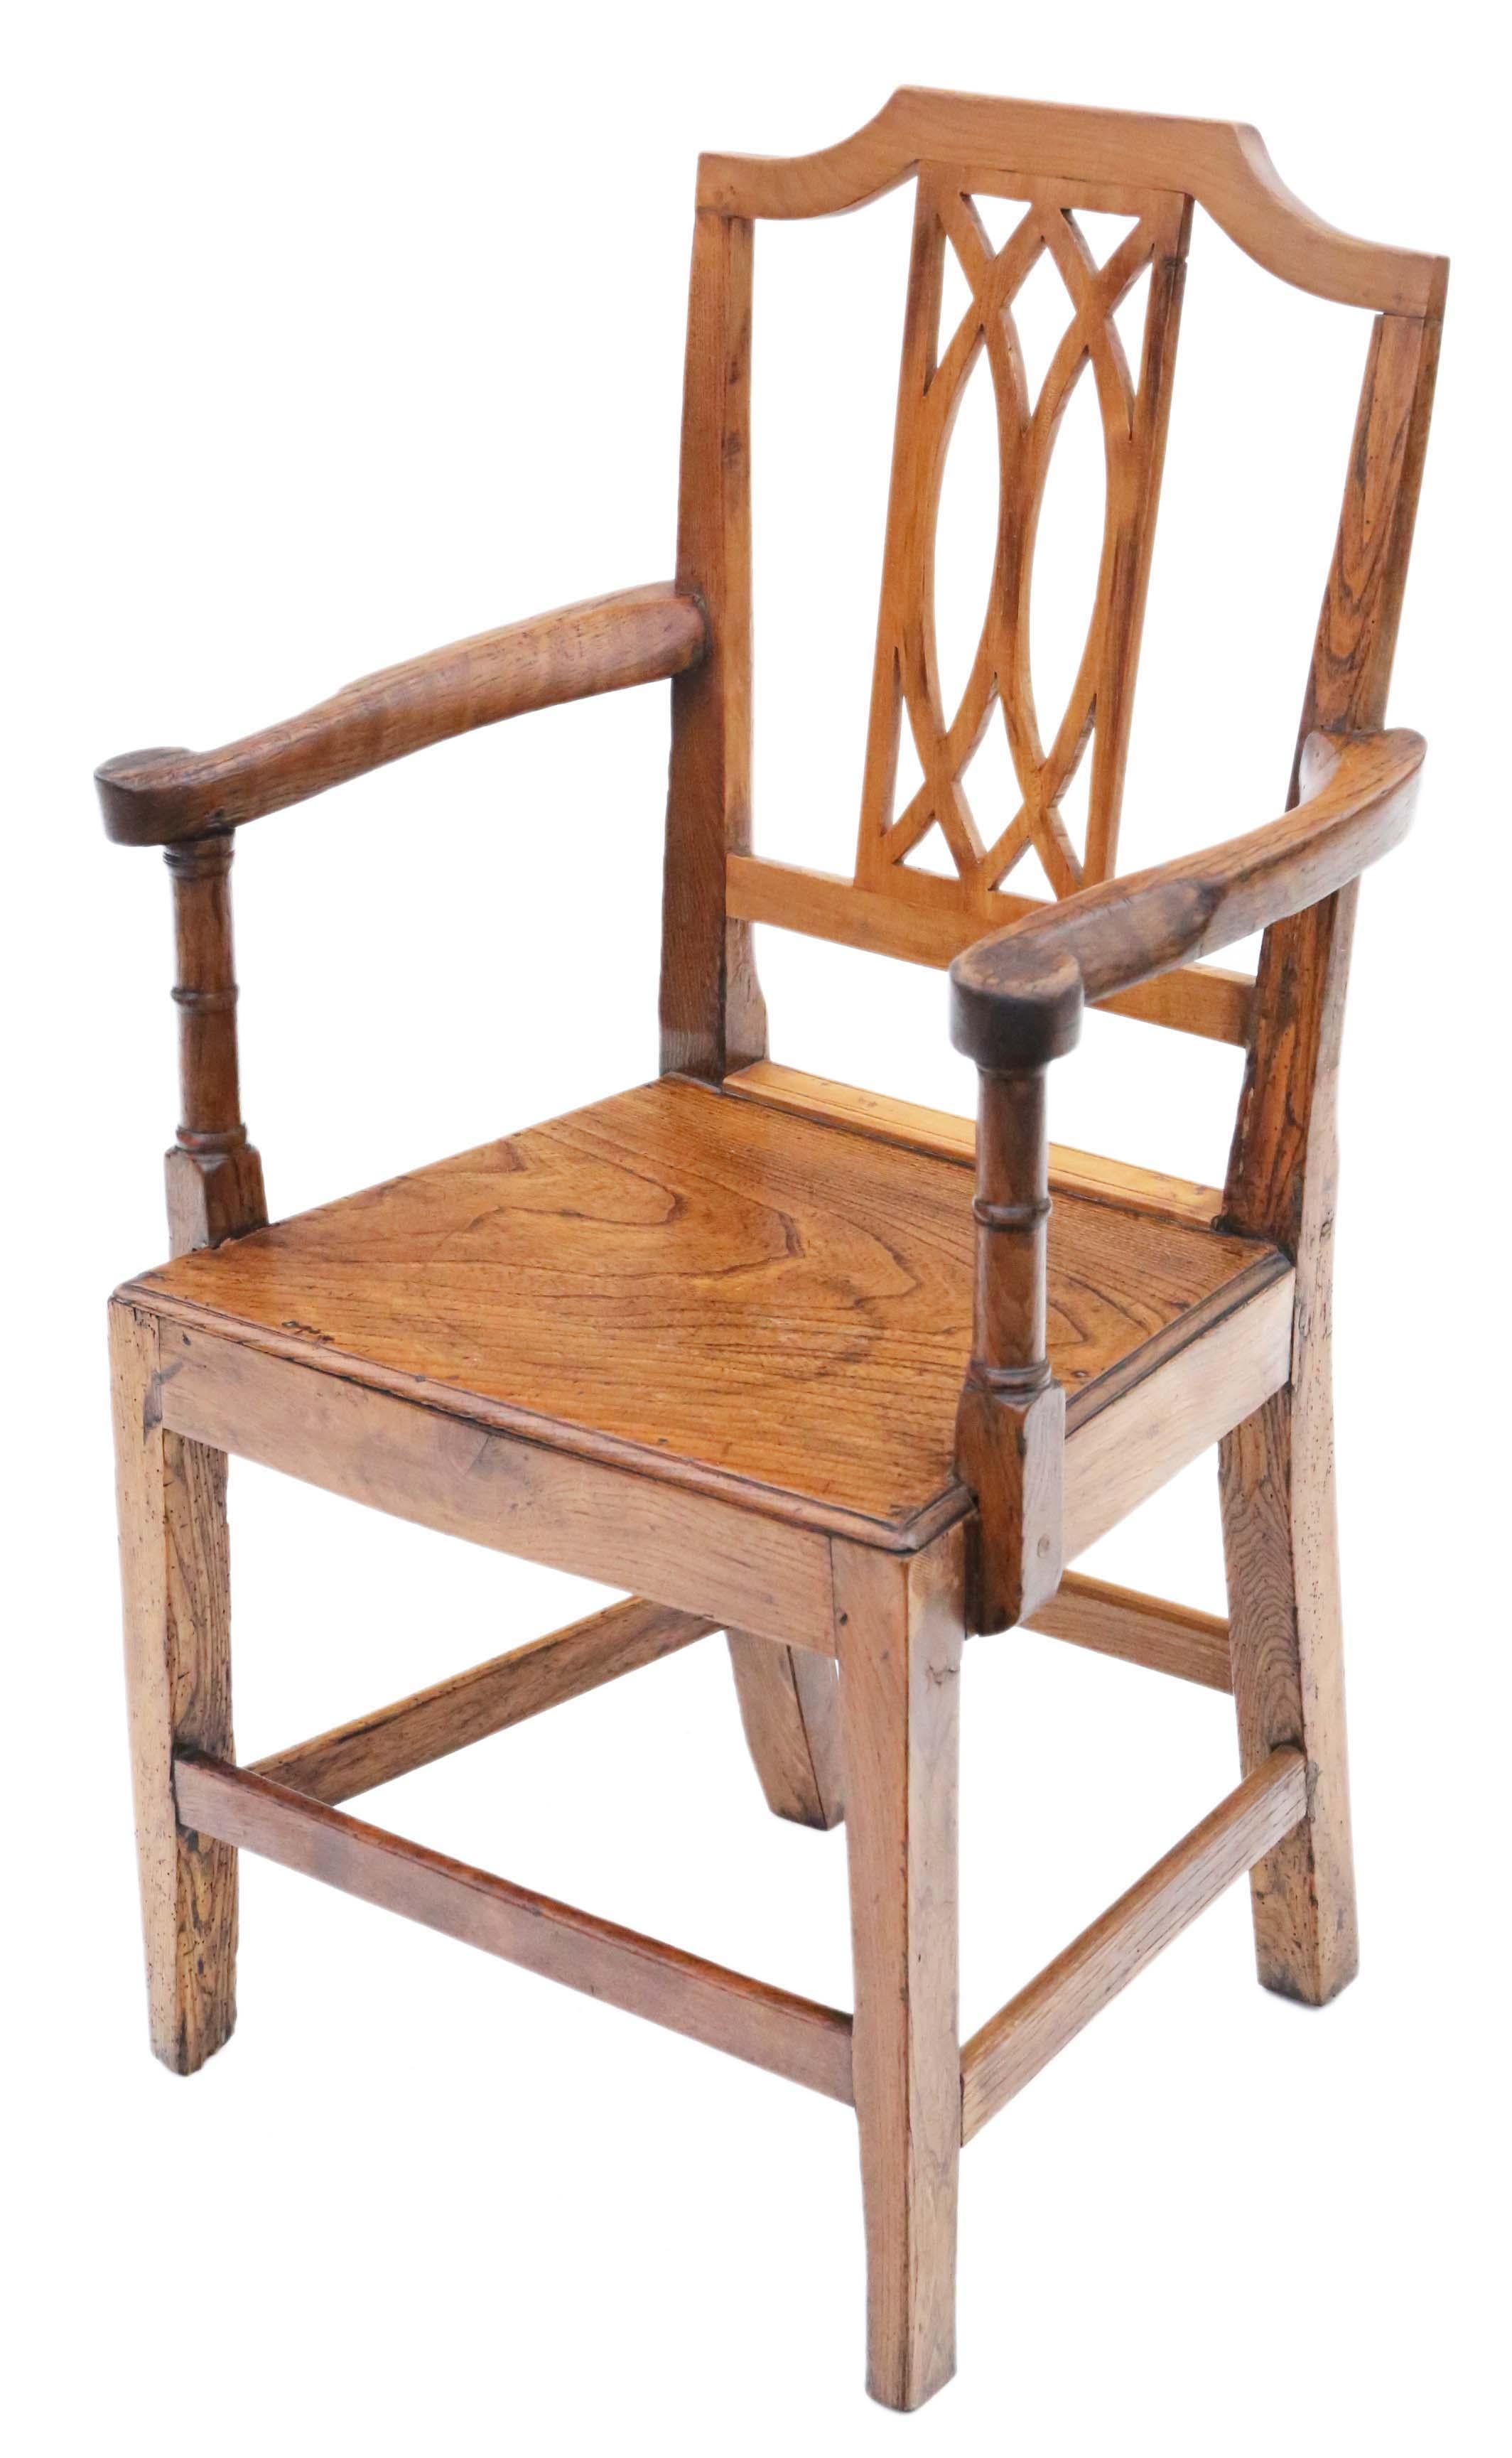 Wood 19th Century Elm Kitchen Dining Chairs: Set of 6 (5+1), Antique Quality For Sale